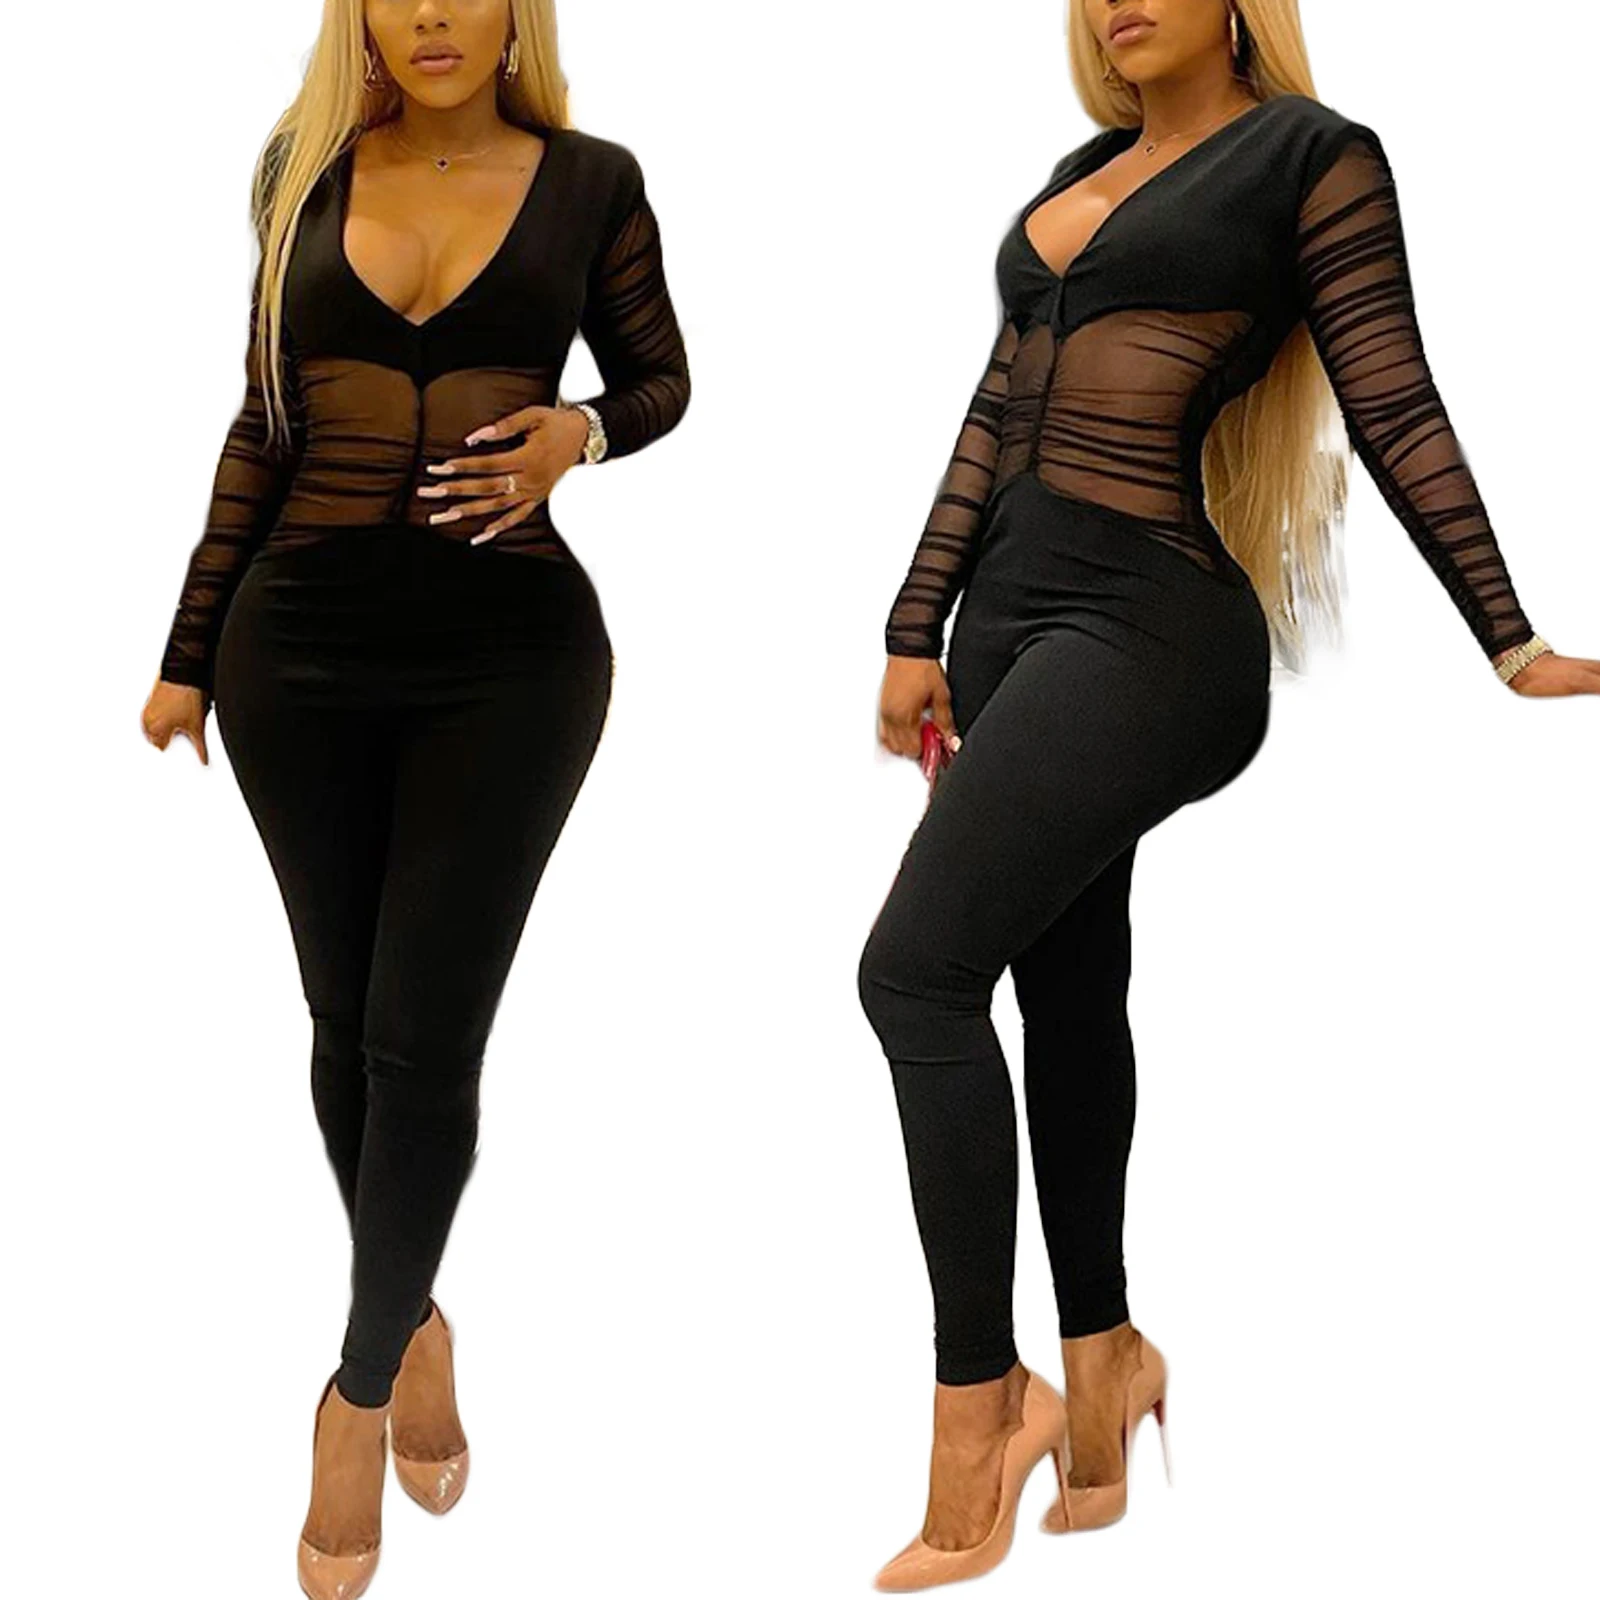 

hirigin New Fashion Women Close-fitting Jumpsuit Black Solid Color Long Sleeve Plunging Neckline See-through Mesh Sexy Overalls